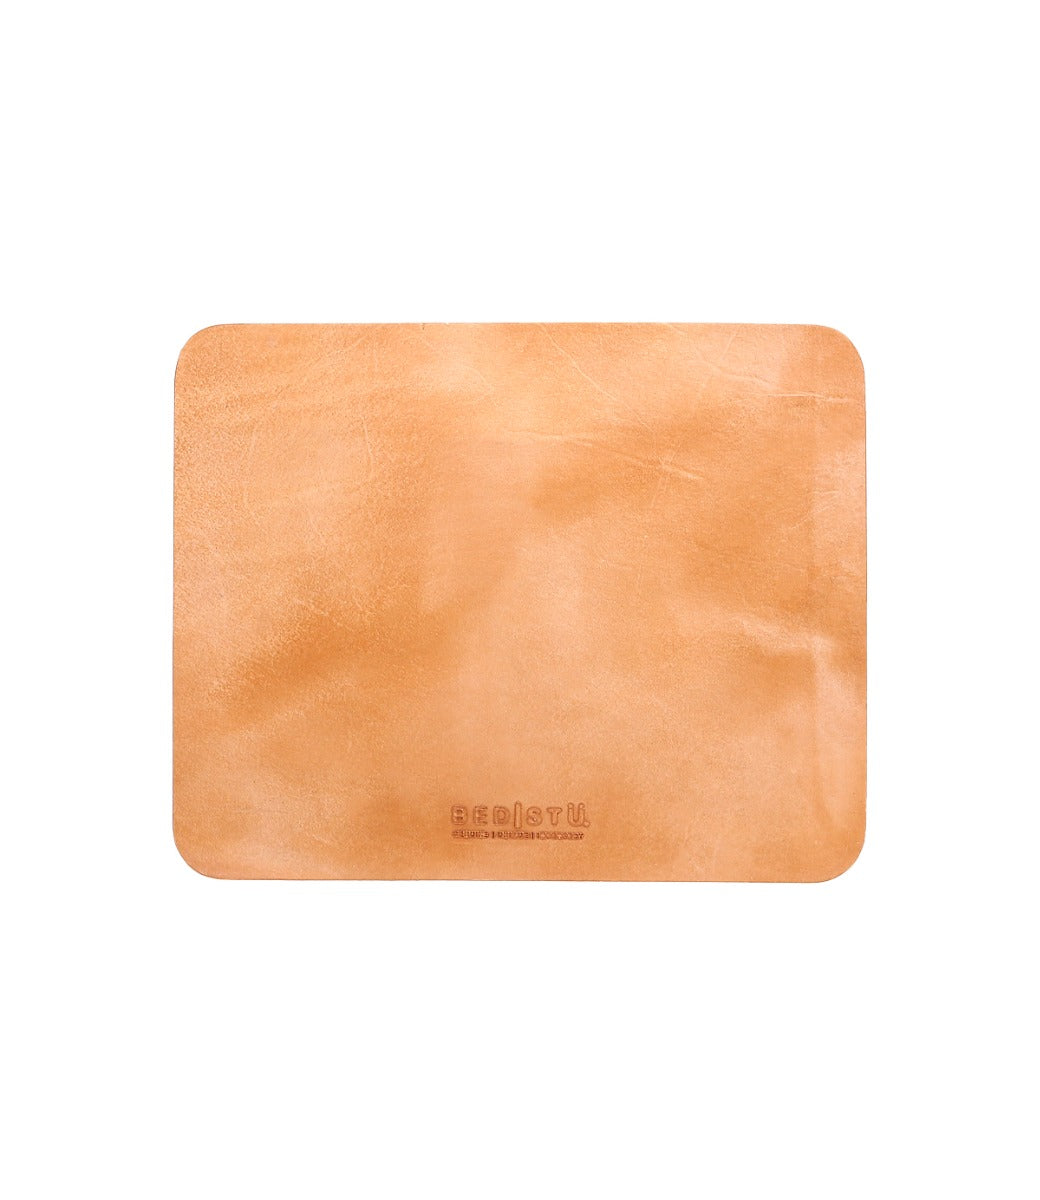 A Bed Stu Launcher tan leather coaster on a white background.